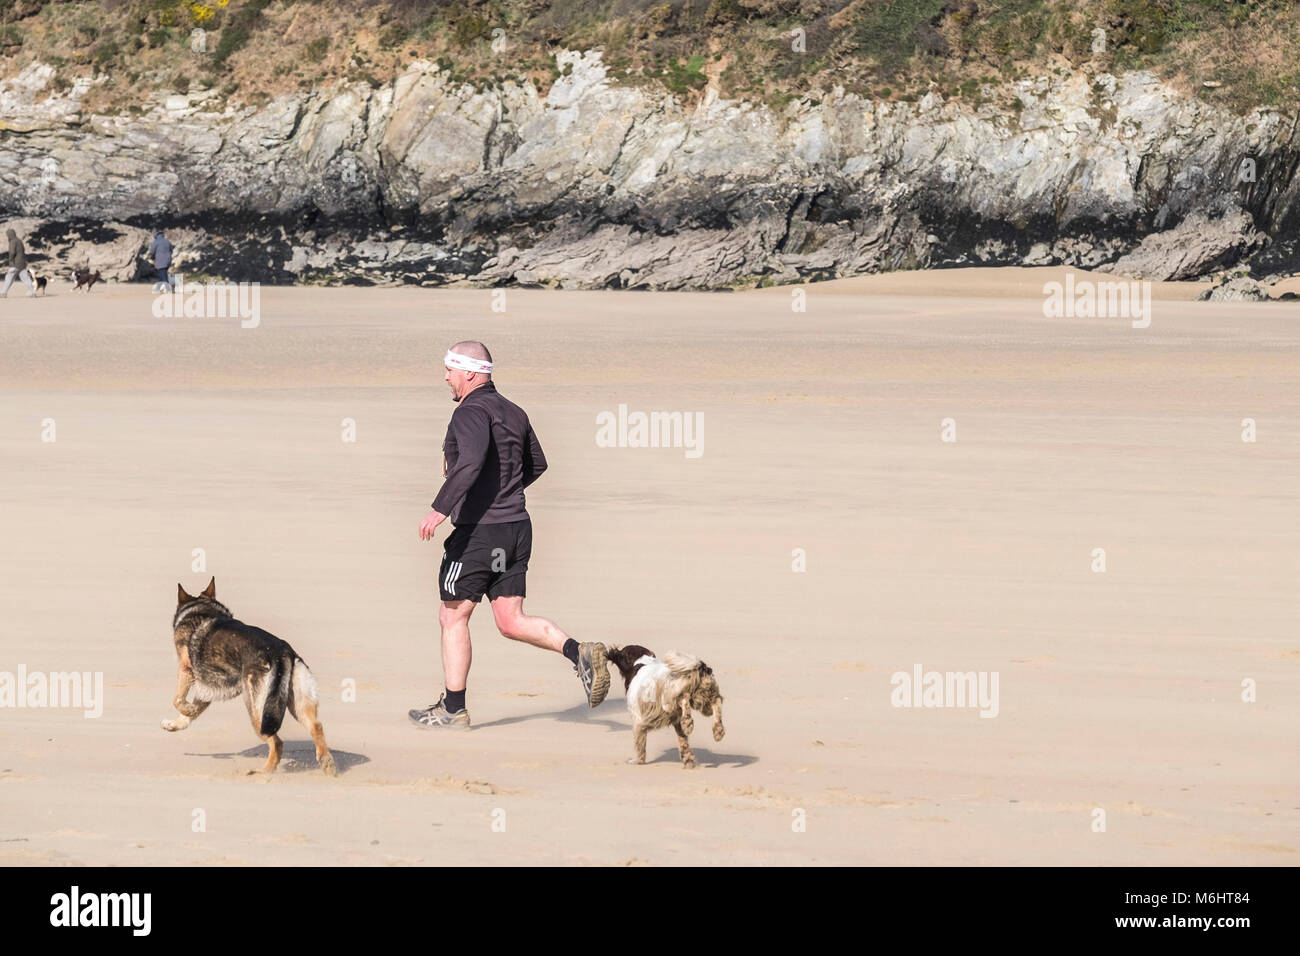 A man and his dogs running along a beach. Stock Photo